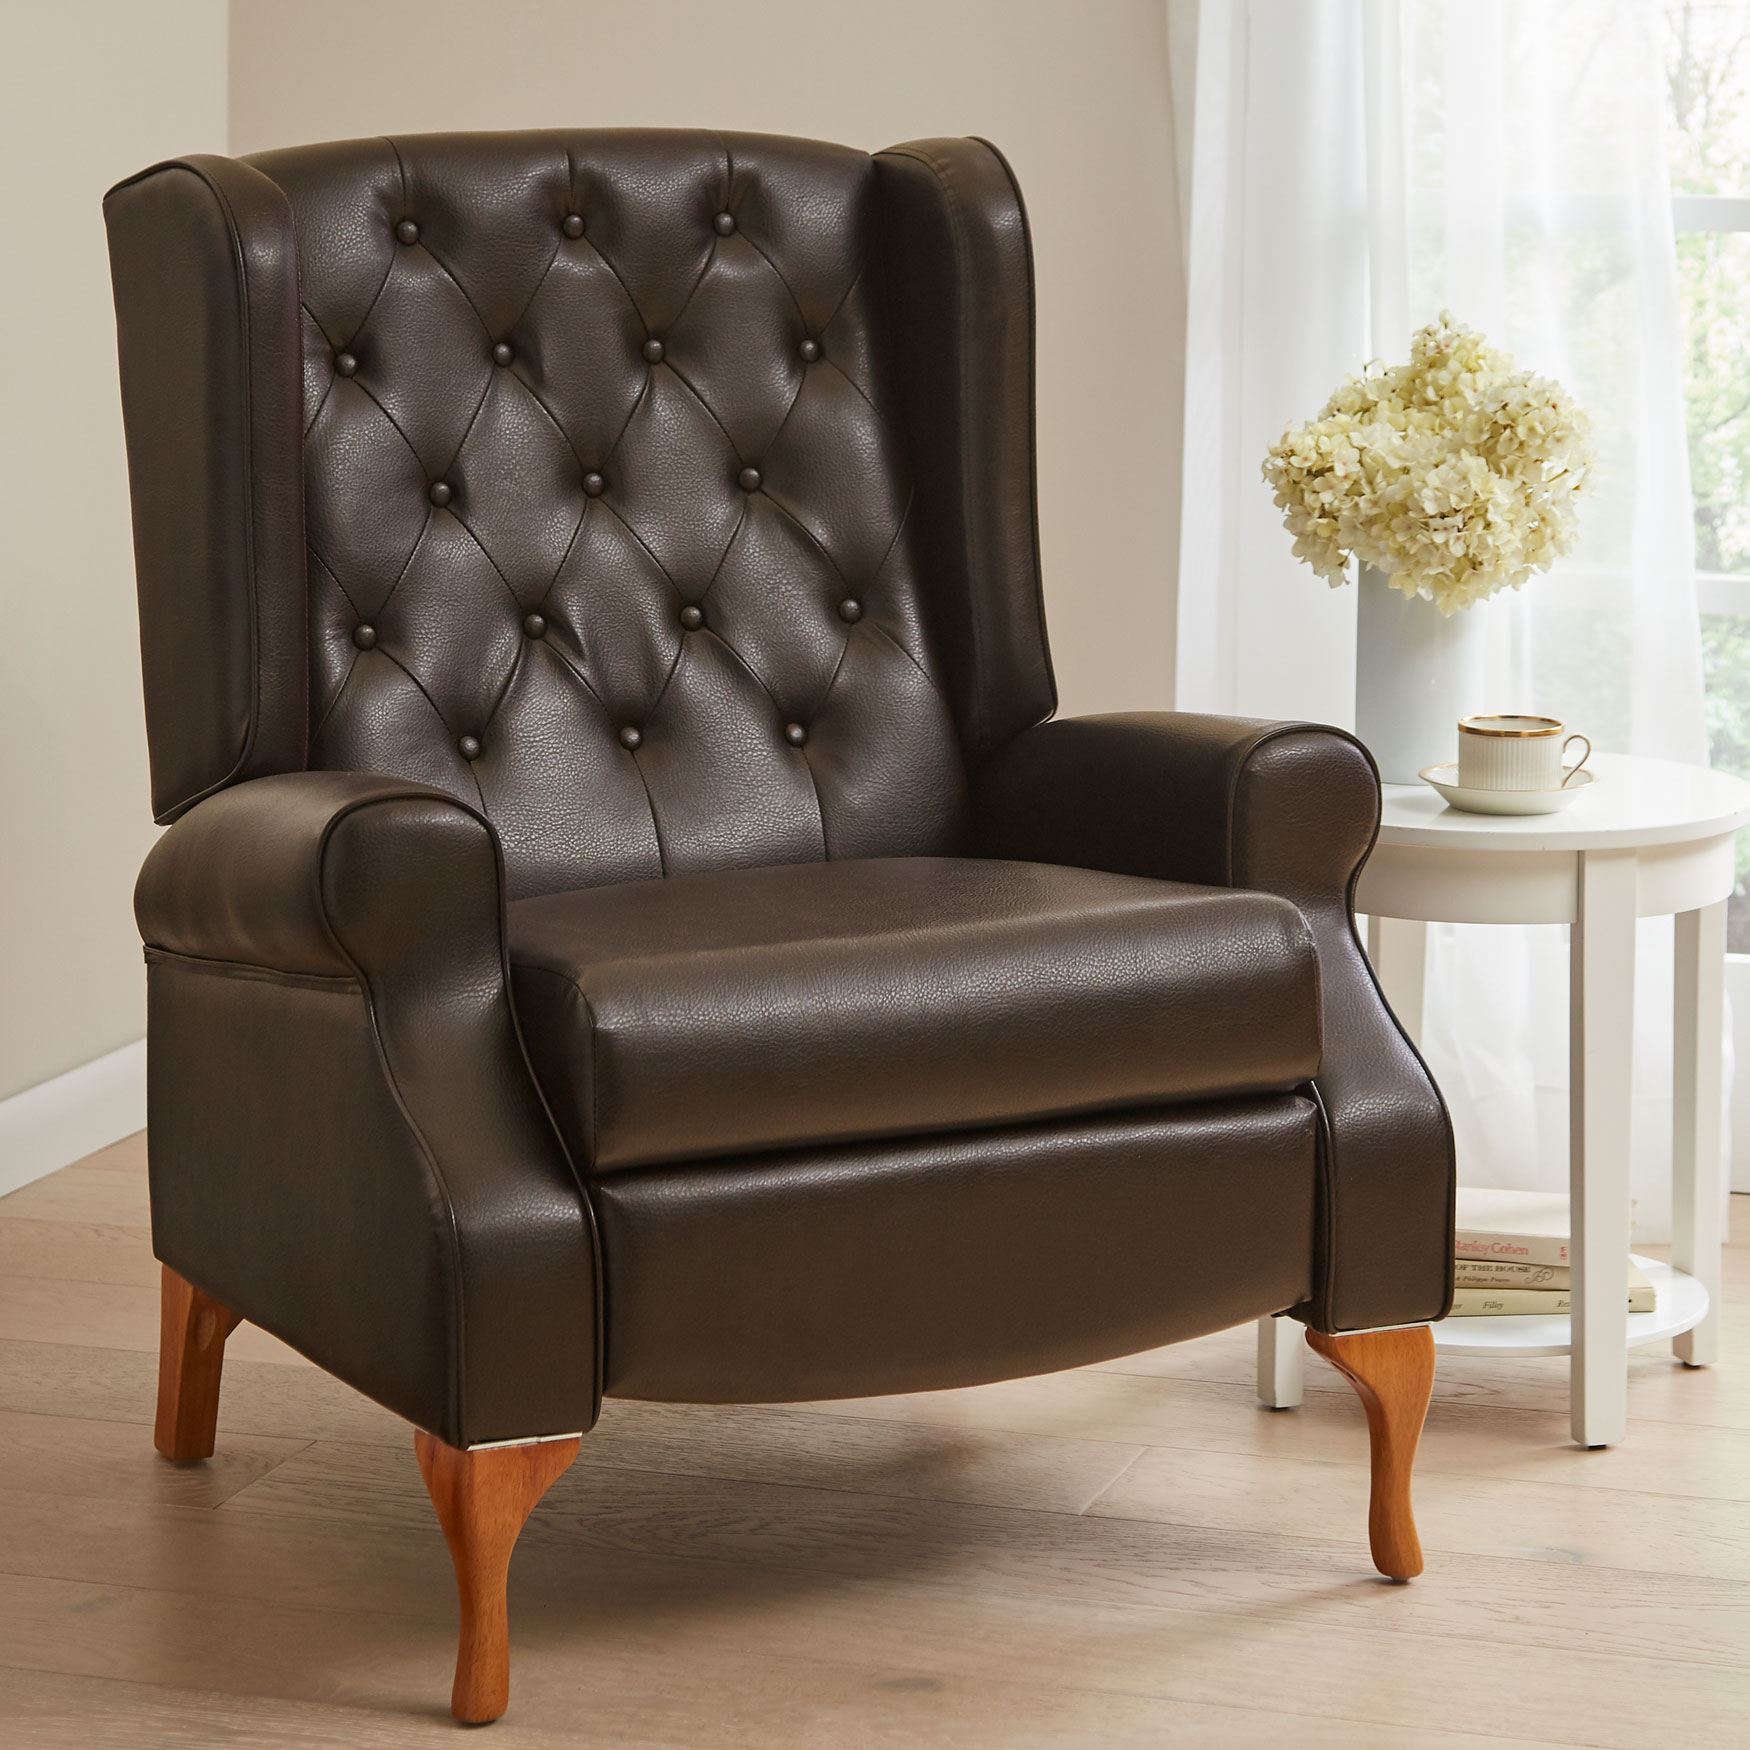 Queen Anne Style Tufted Wingback Recliner| Chairs ...
